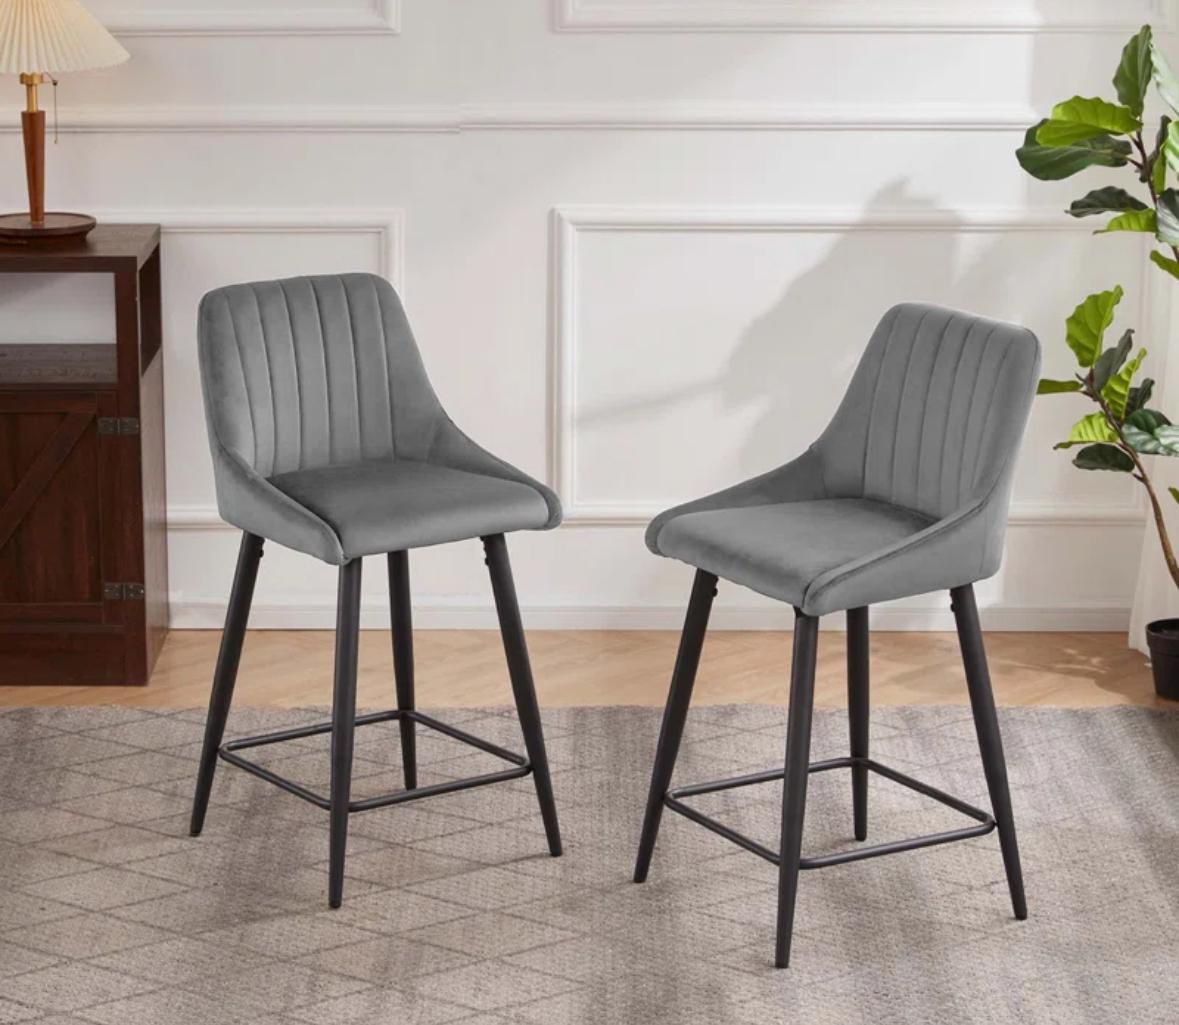 Gray Counter stools / chairs